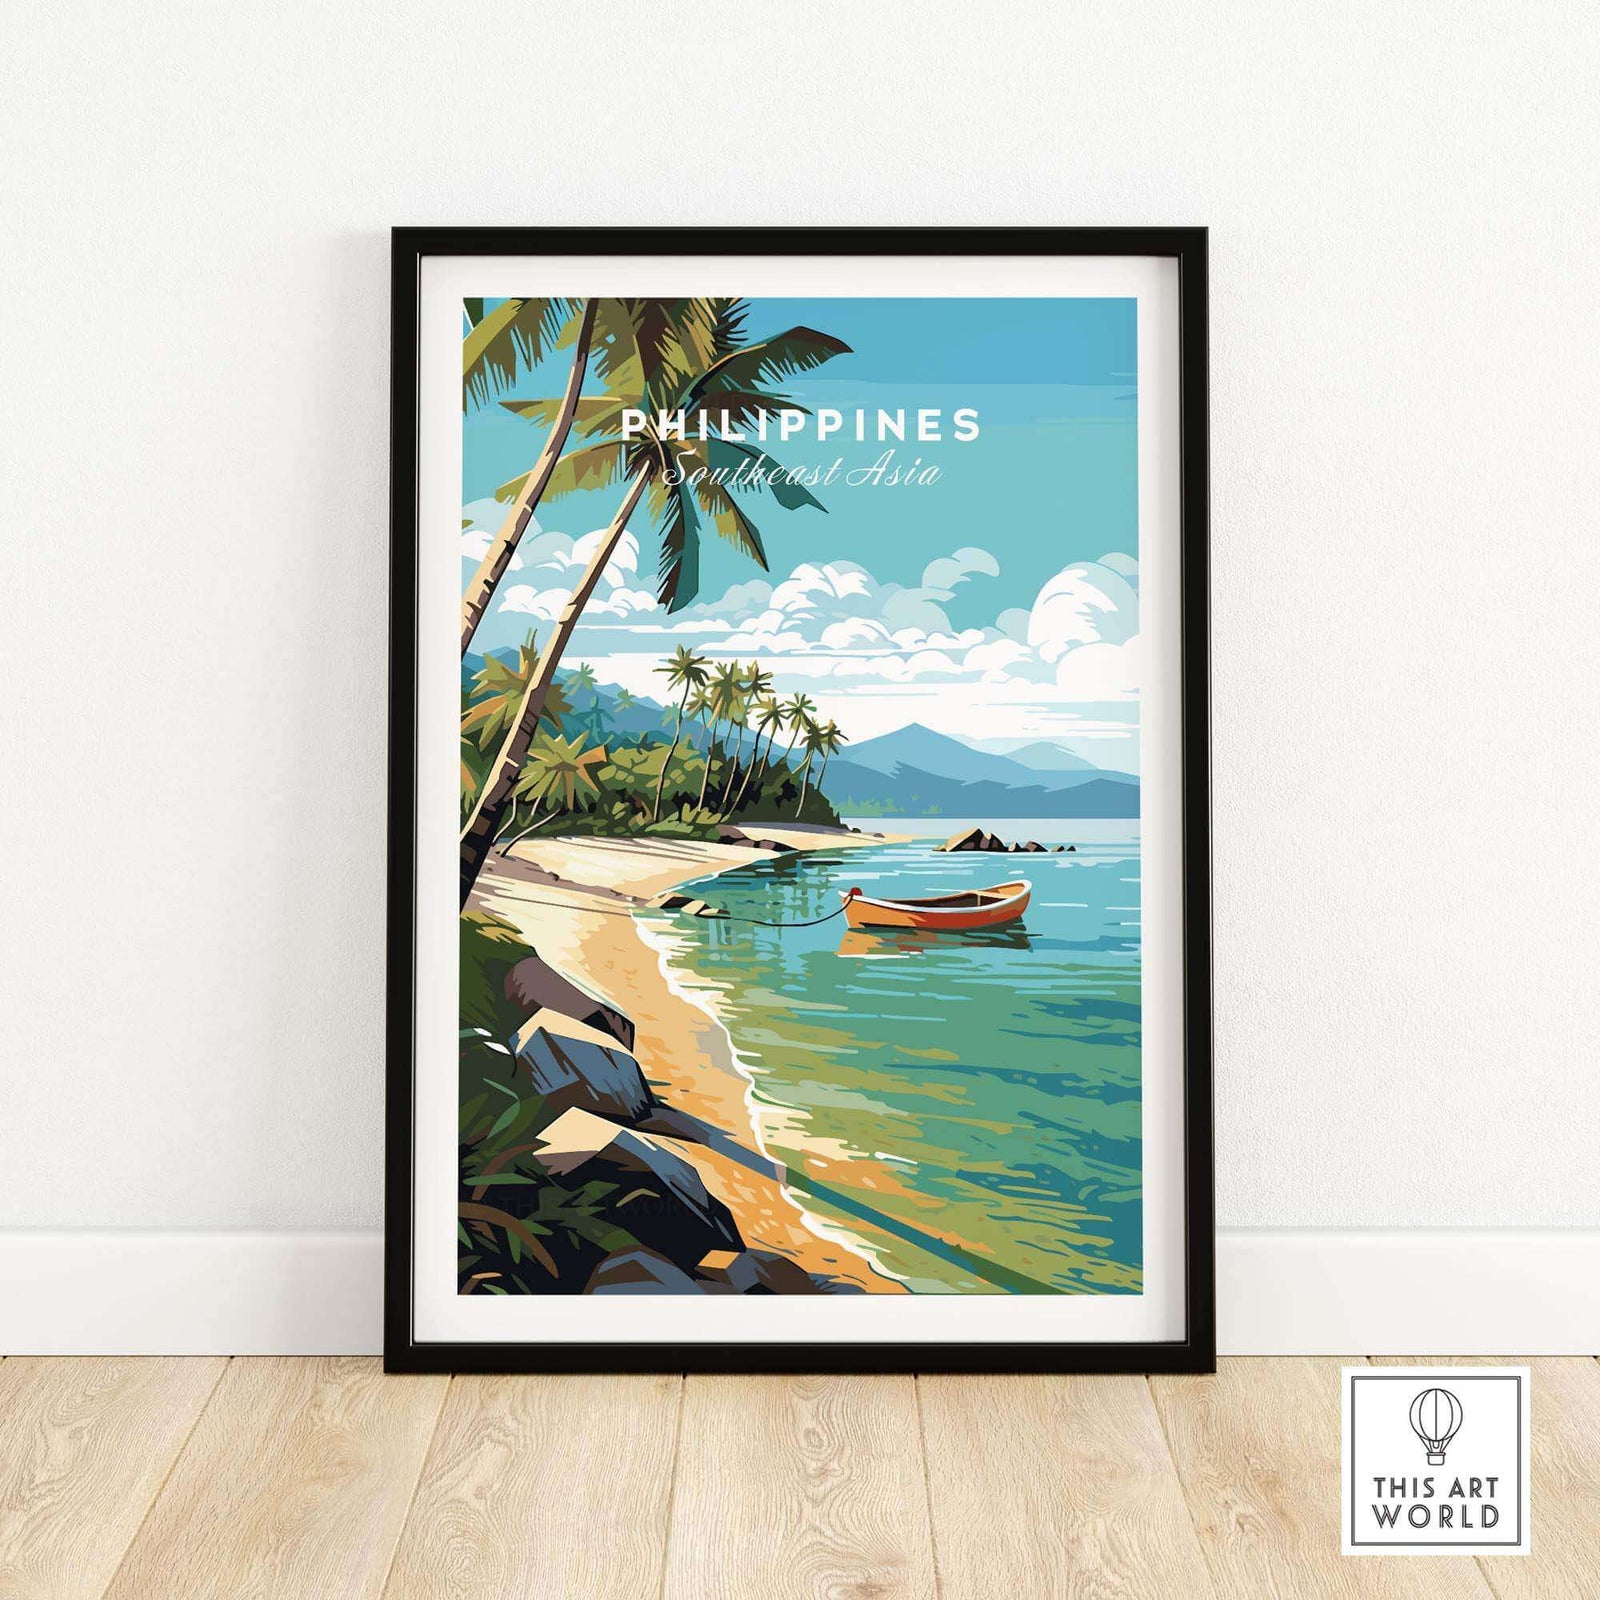 A framed travel poster of the Philippines showing a tropical beach with a boat in a black frame on a wooden floor. 